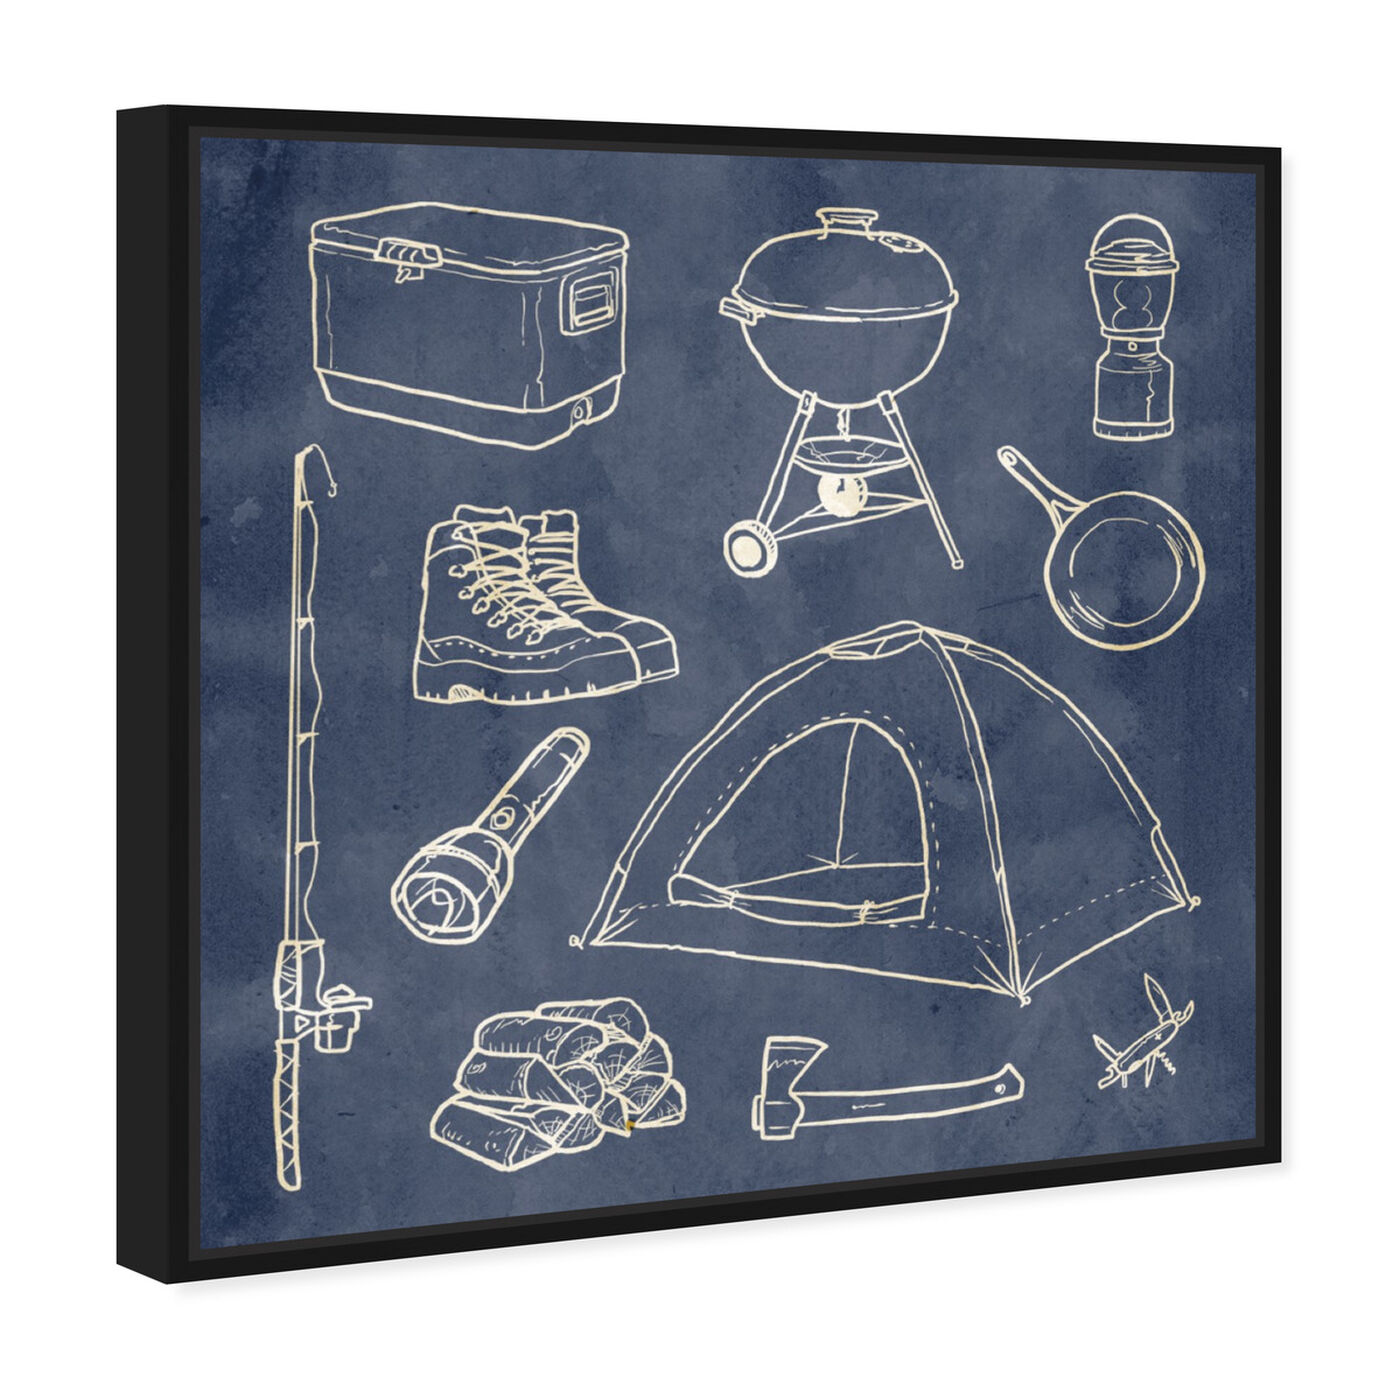 Angled view of Camping Basics featuring entertainment and hobbies and camping art.